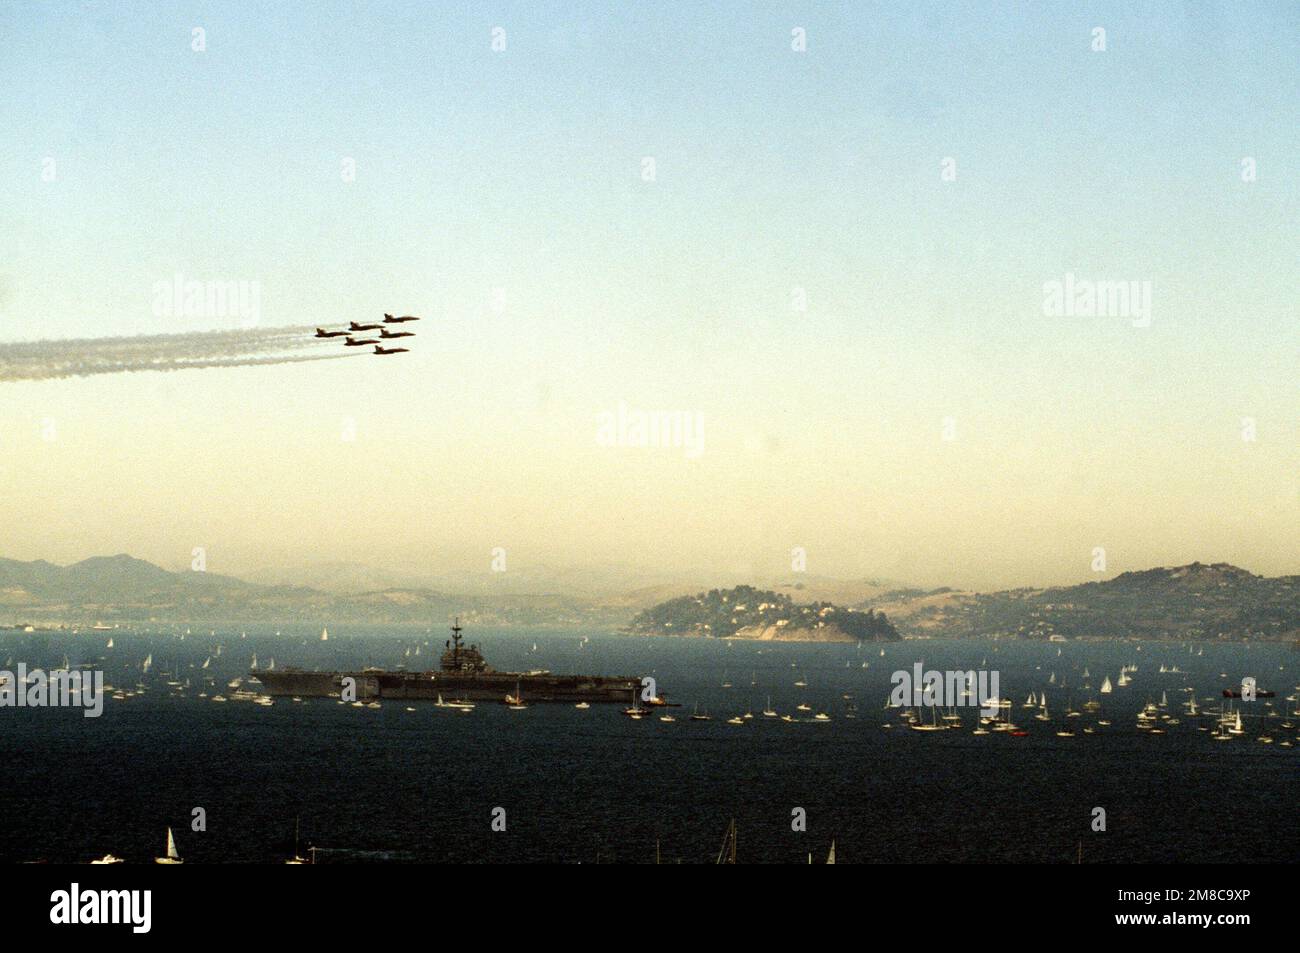 Six F/A-18 Hornet aircraft of the Navy Blue Angels flight demonstration squadron pass over the aircraft carrier USS INDEPENDENCE (CV-62) during an air show staged for Fleet Week. Base: San Francisco Bay State: California (CA) Country: United States Of America (USA) Stock Photo